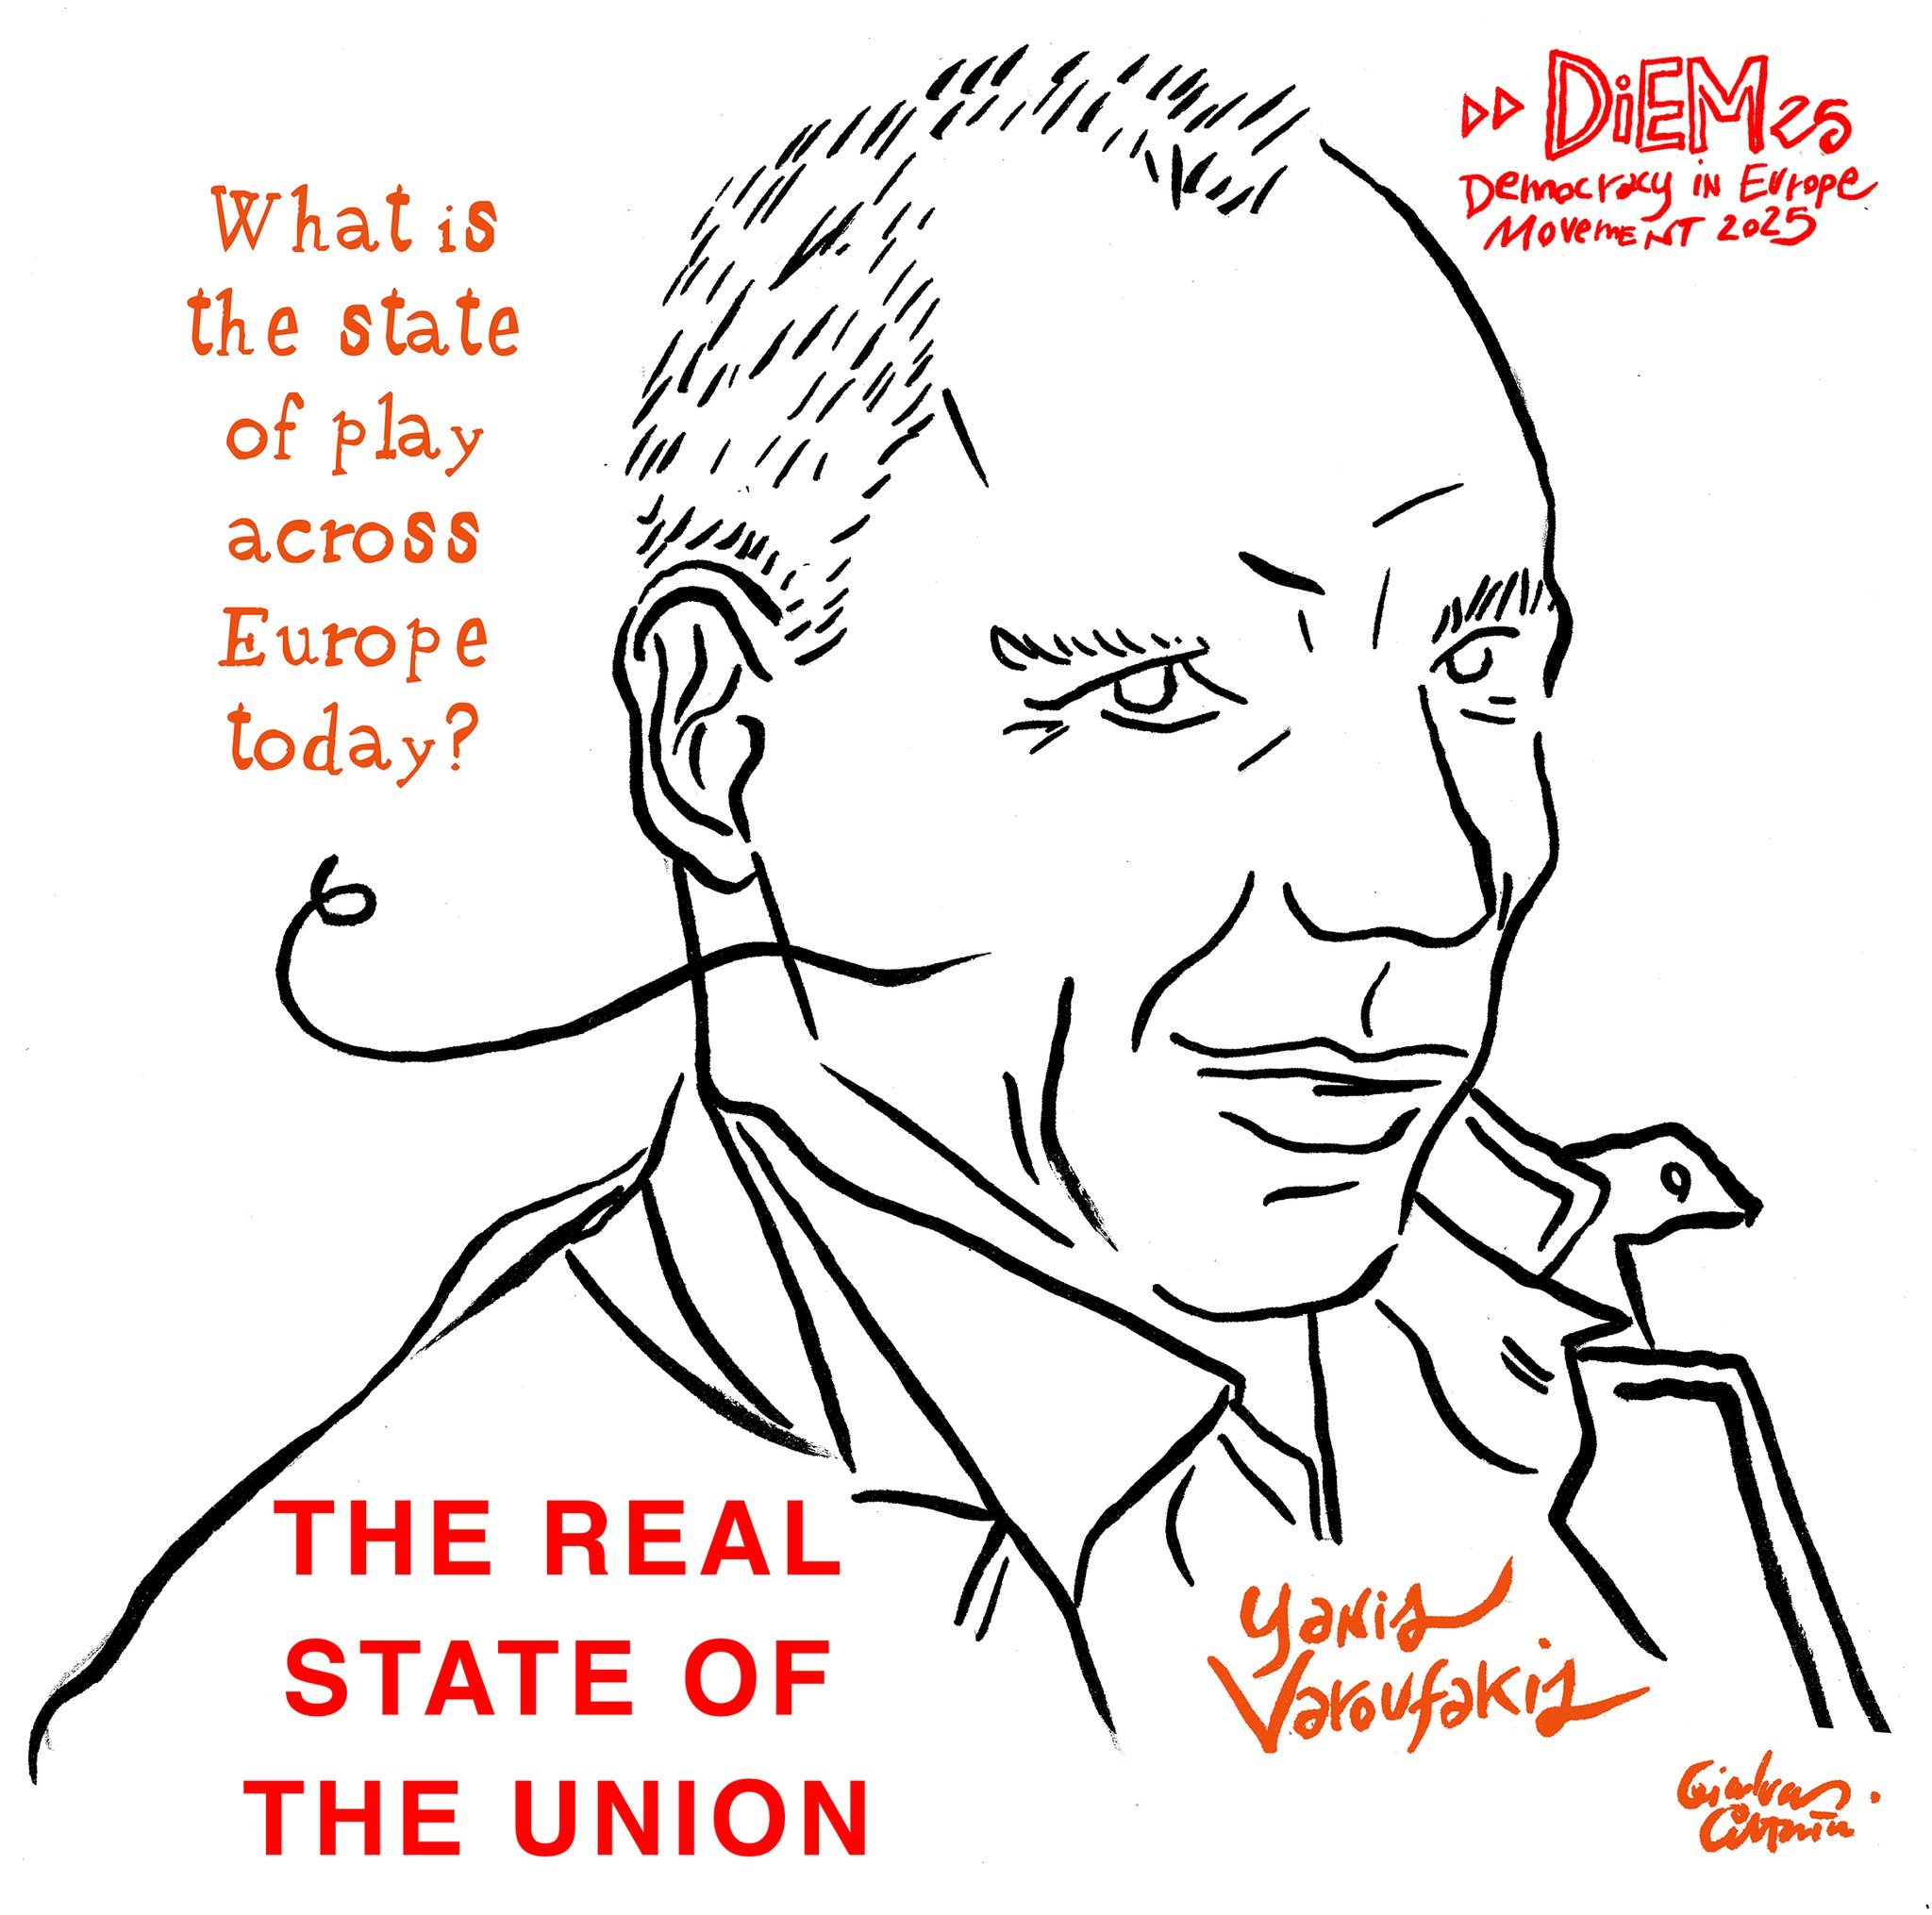 In Brussels next Saturday 9/9? Come to the Bozar to discuss with DiEM25’s finest, plus guests including President Rafael Correa of Ecuador, the Real State of the European Union